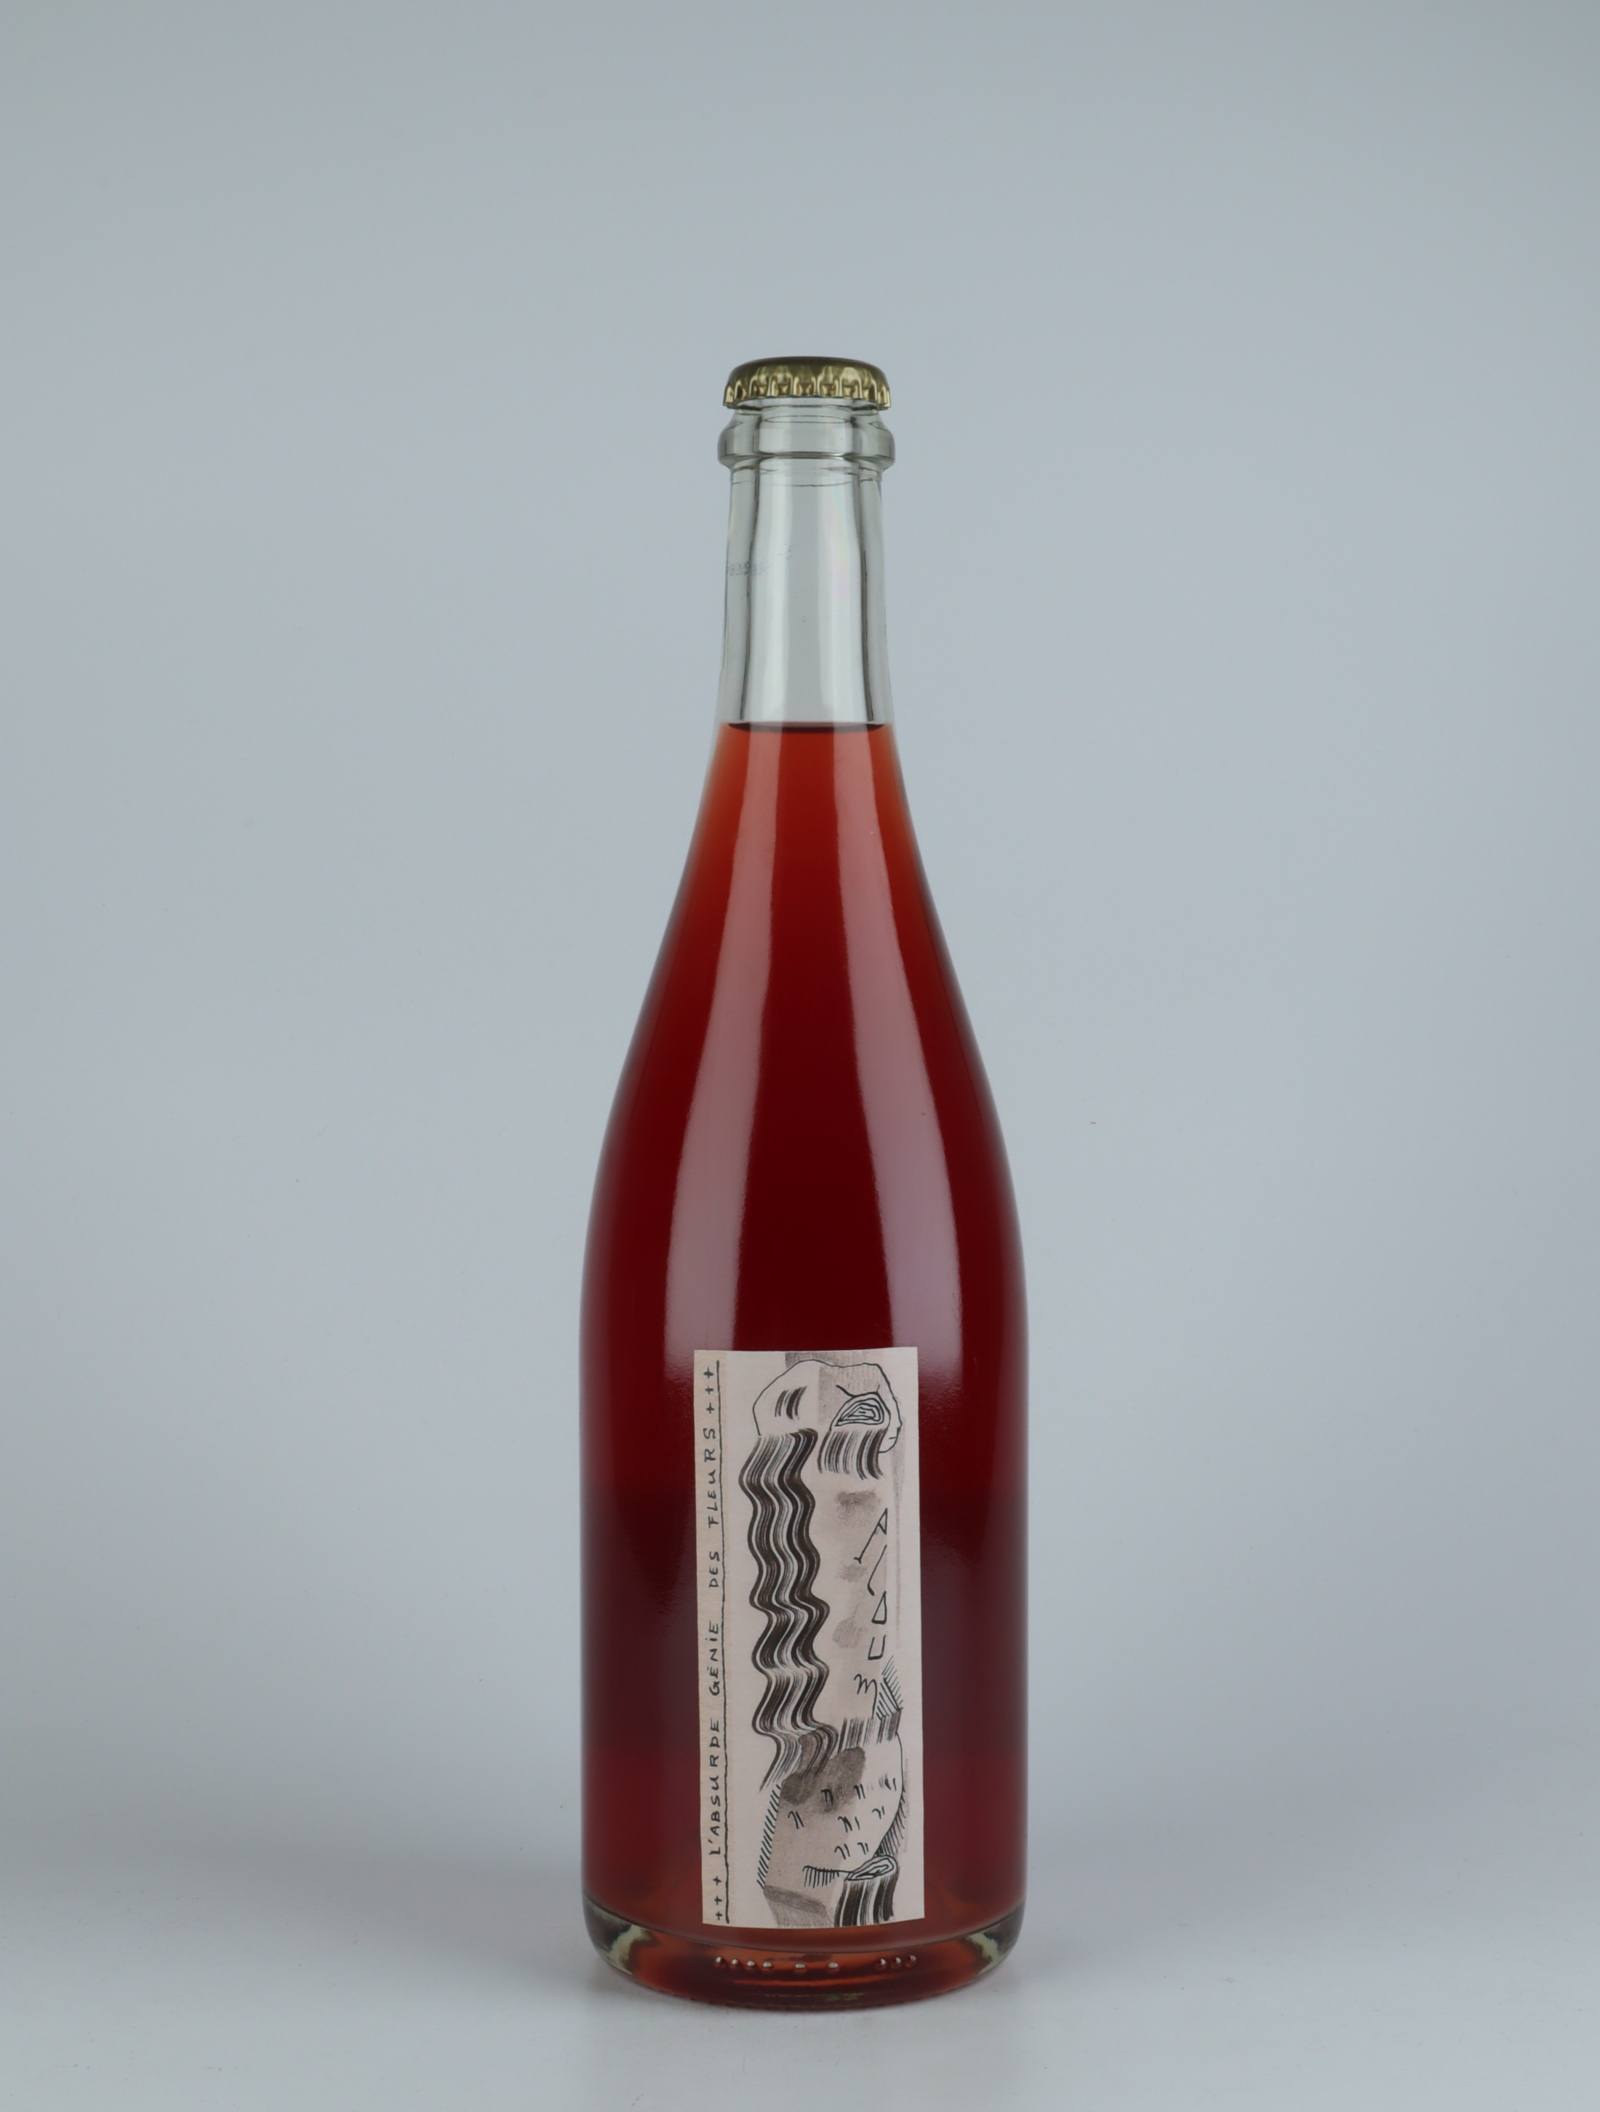 A bottle 2020 Ploum Rosé from , Languedoc in France